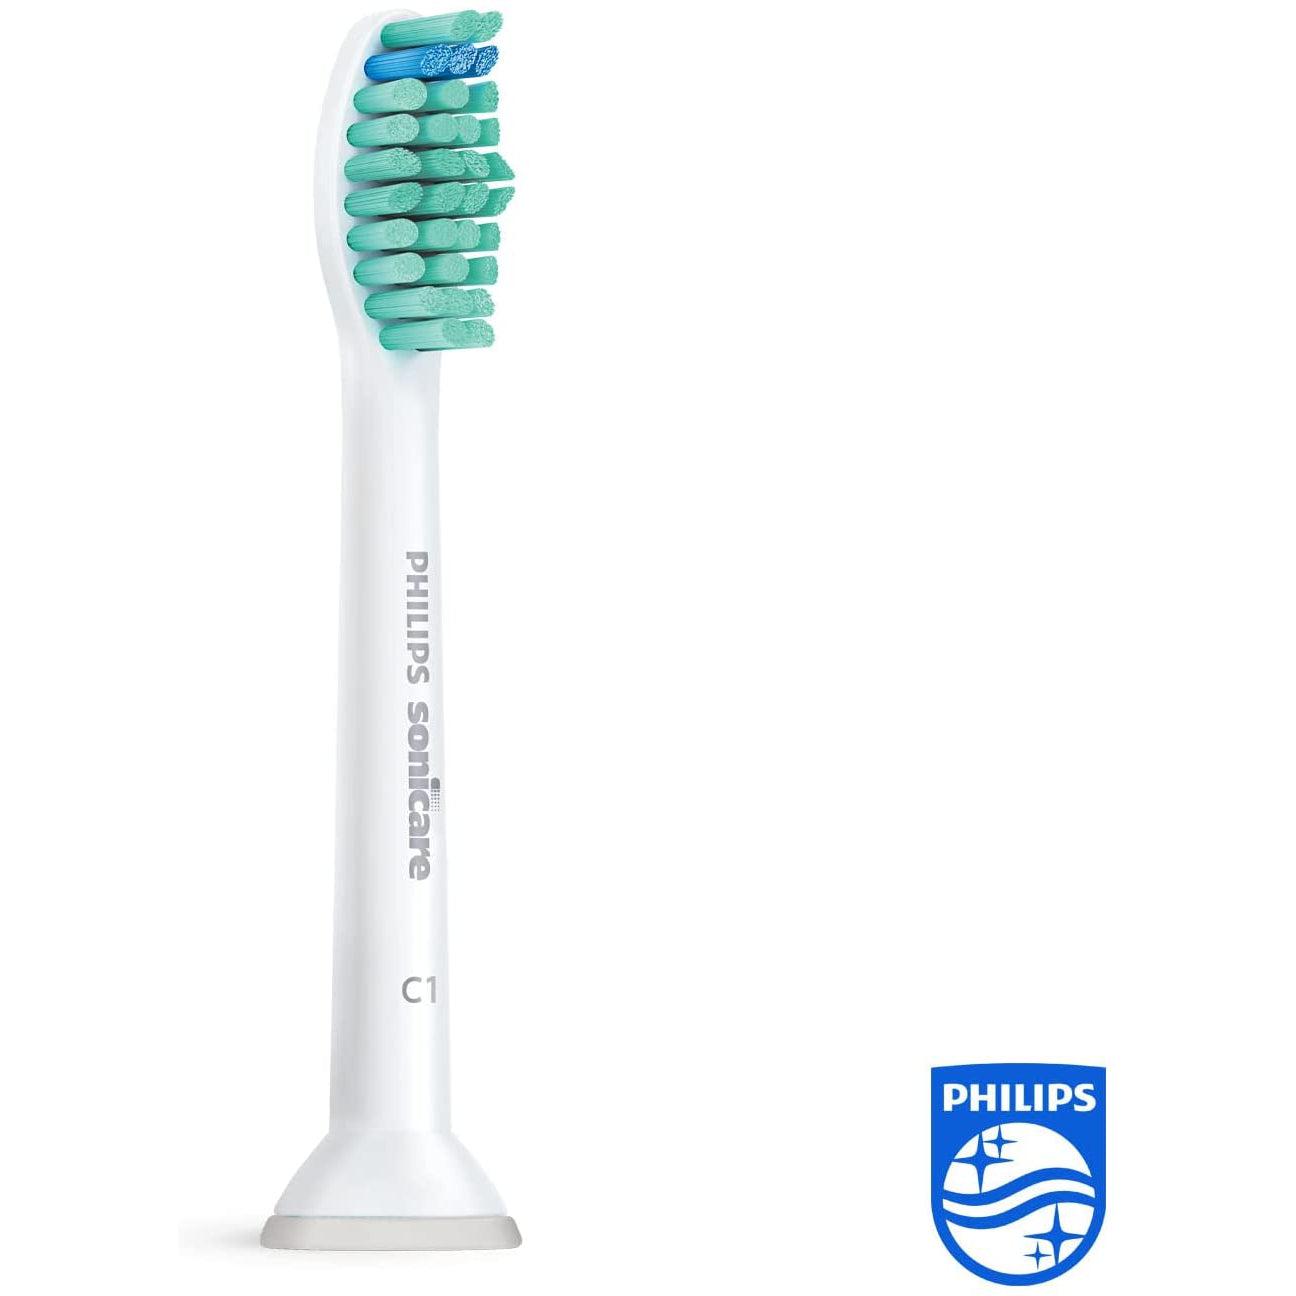 Philips Sonicare ProResults Standard Sonic Toothbrush Heads HX6014/07 White, 4 Pack - Healthxpress.ie